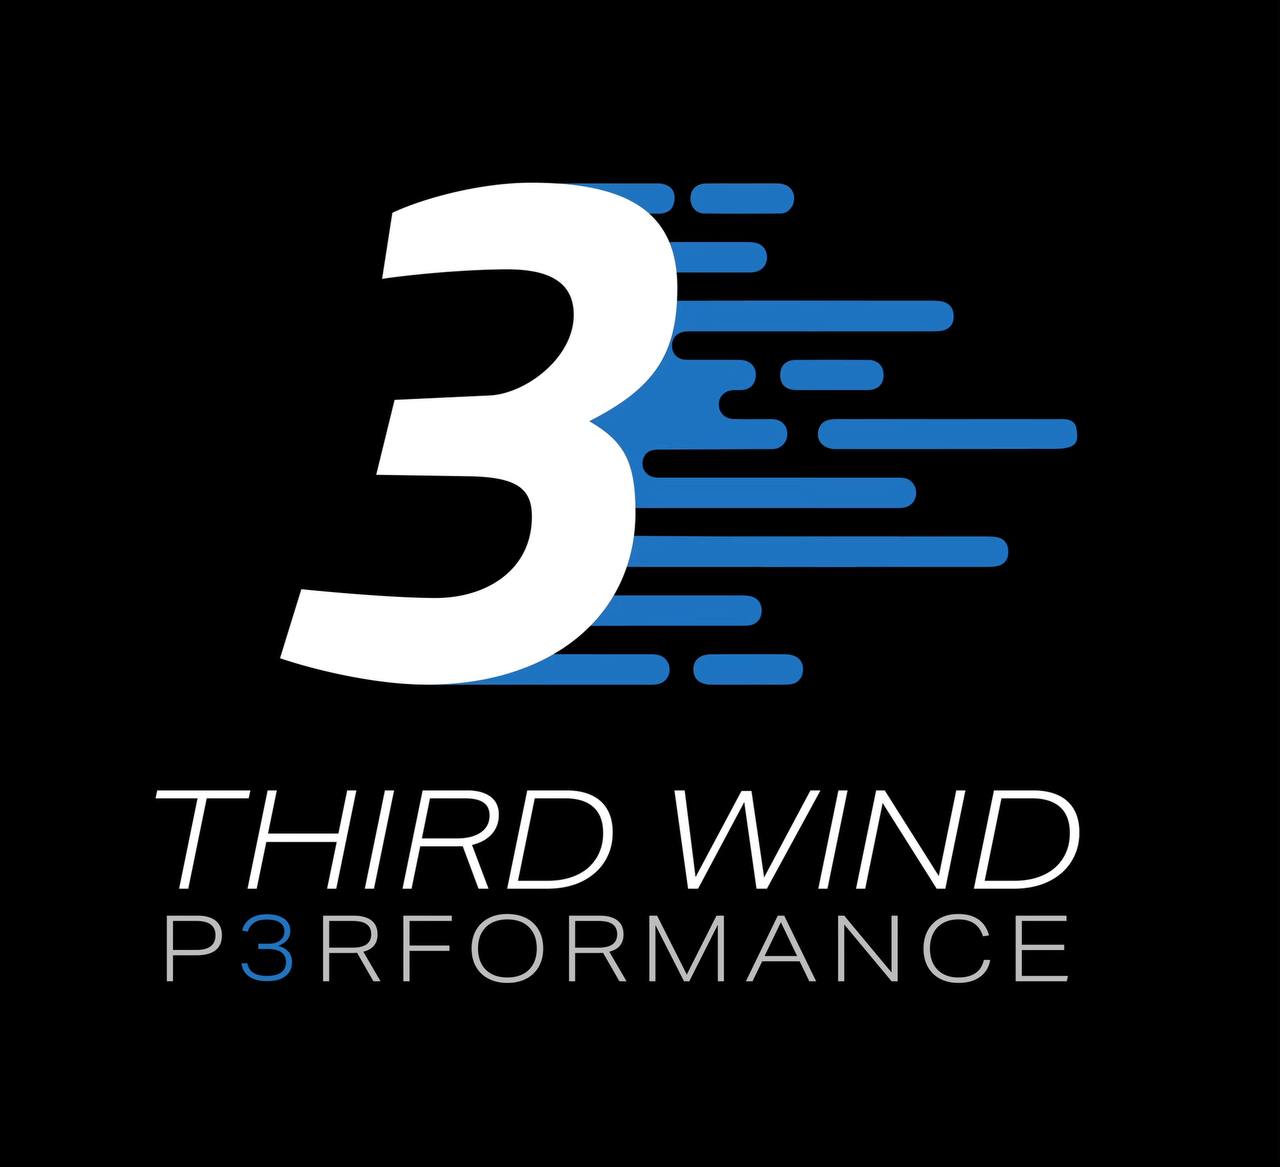 Third Wind Performance, Wednesday, July 27, 2022, Press release picture